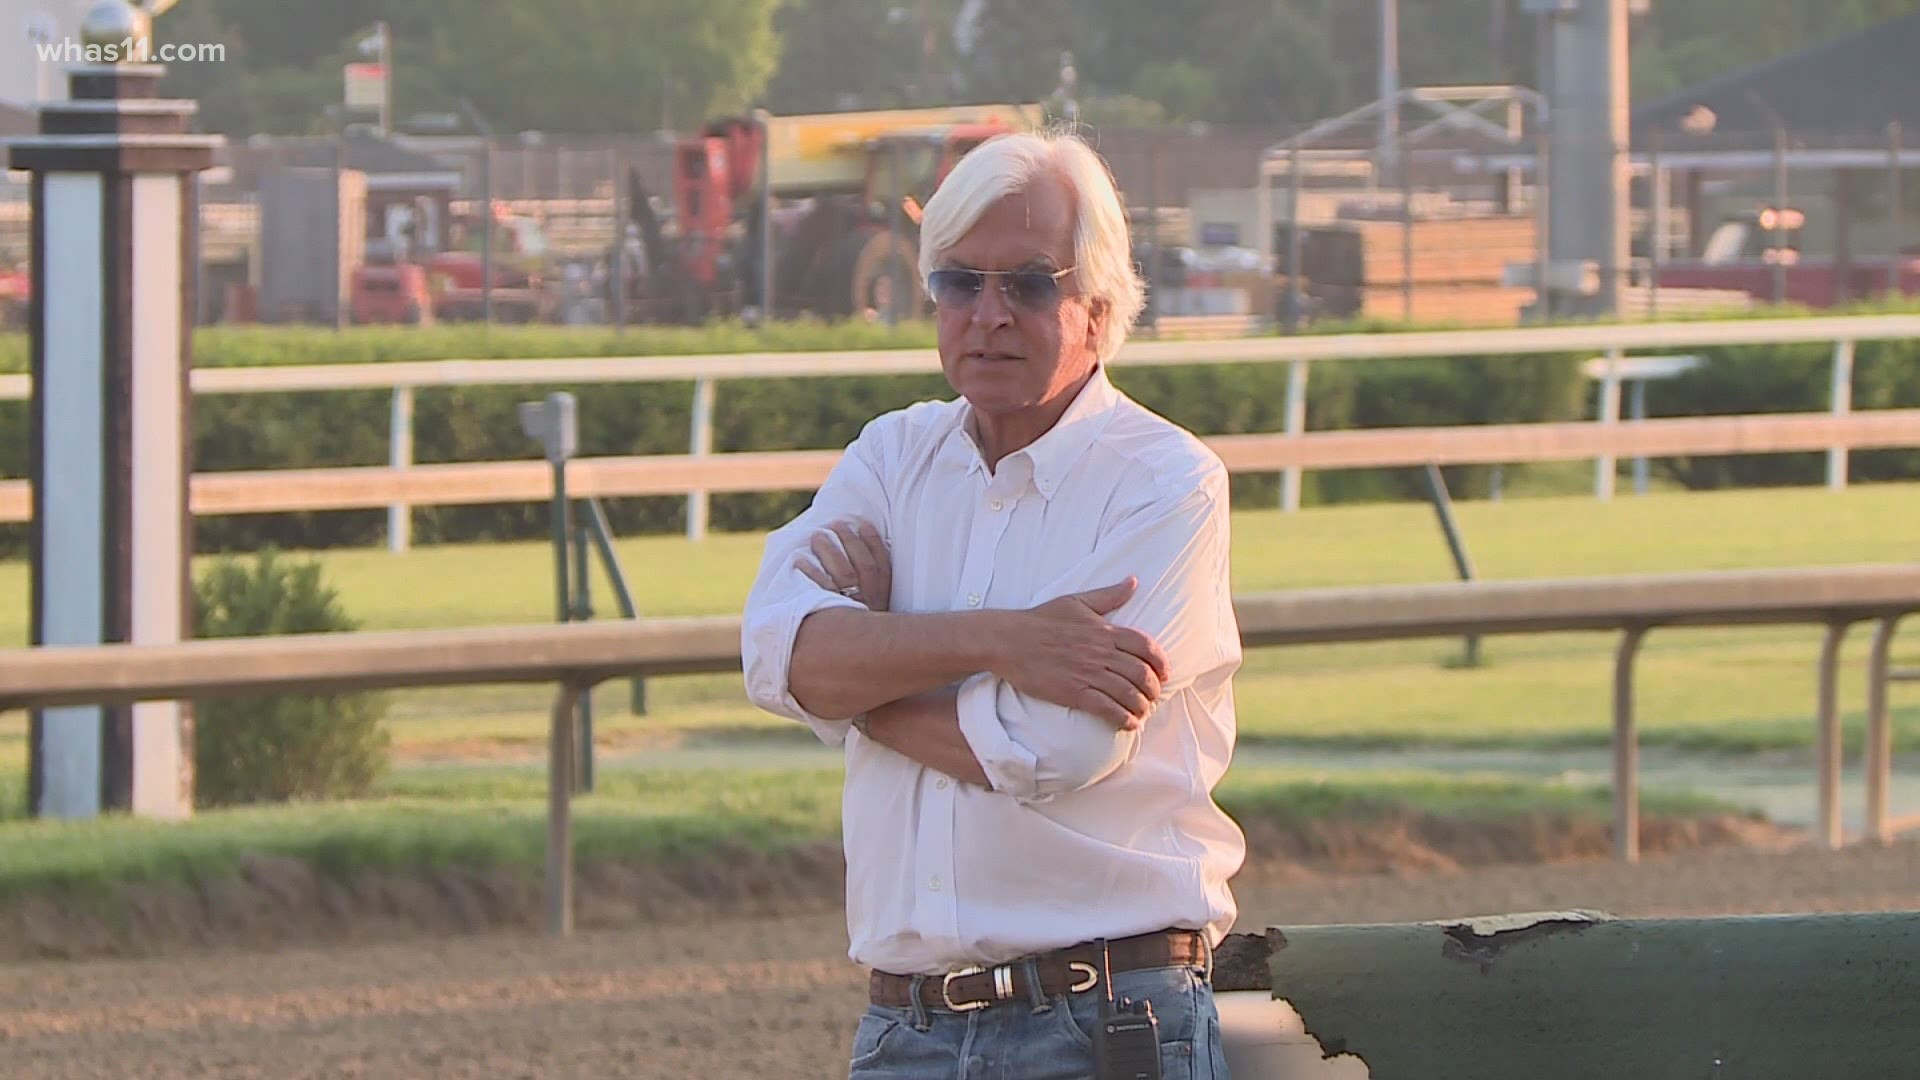 The Daily Racing Form is reporting that the famed  Spendthrift Farm in Lexington is removing several horses from Baffert's care.